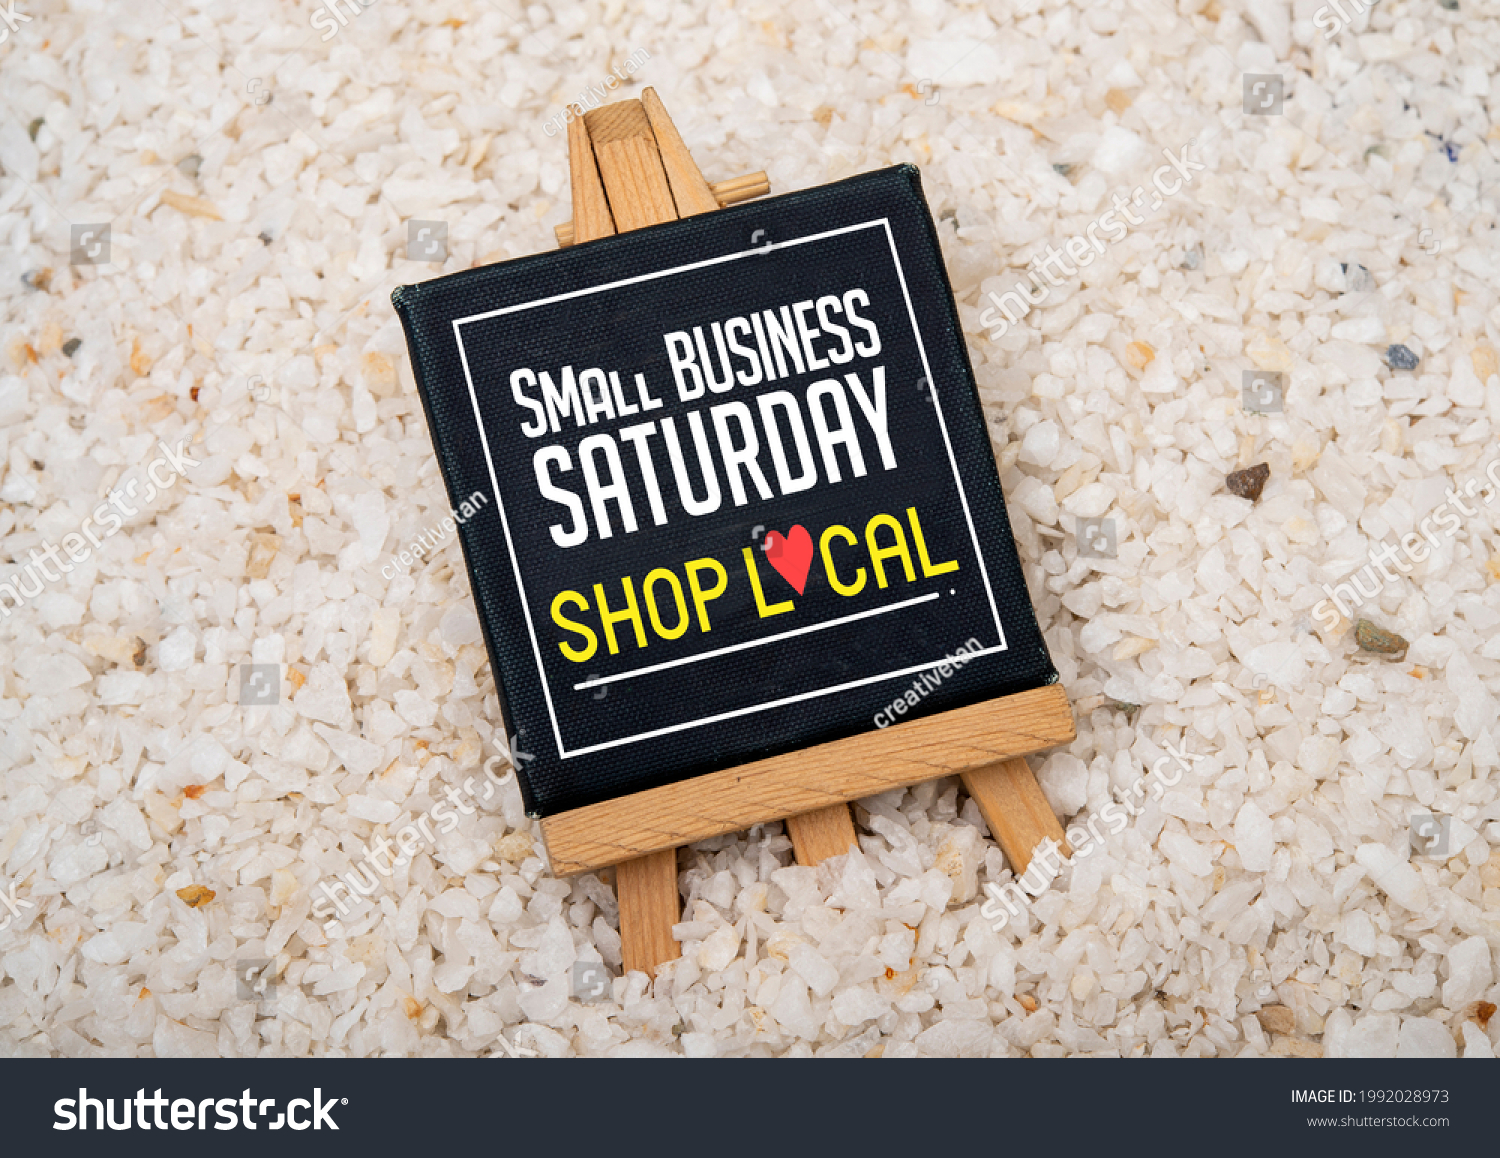 Small Business Saturday and shop local sign for businesses. #1992028973